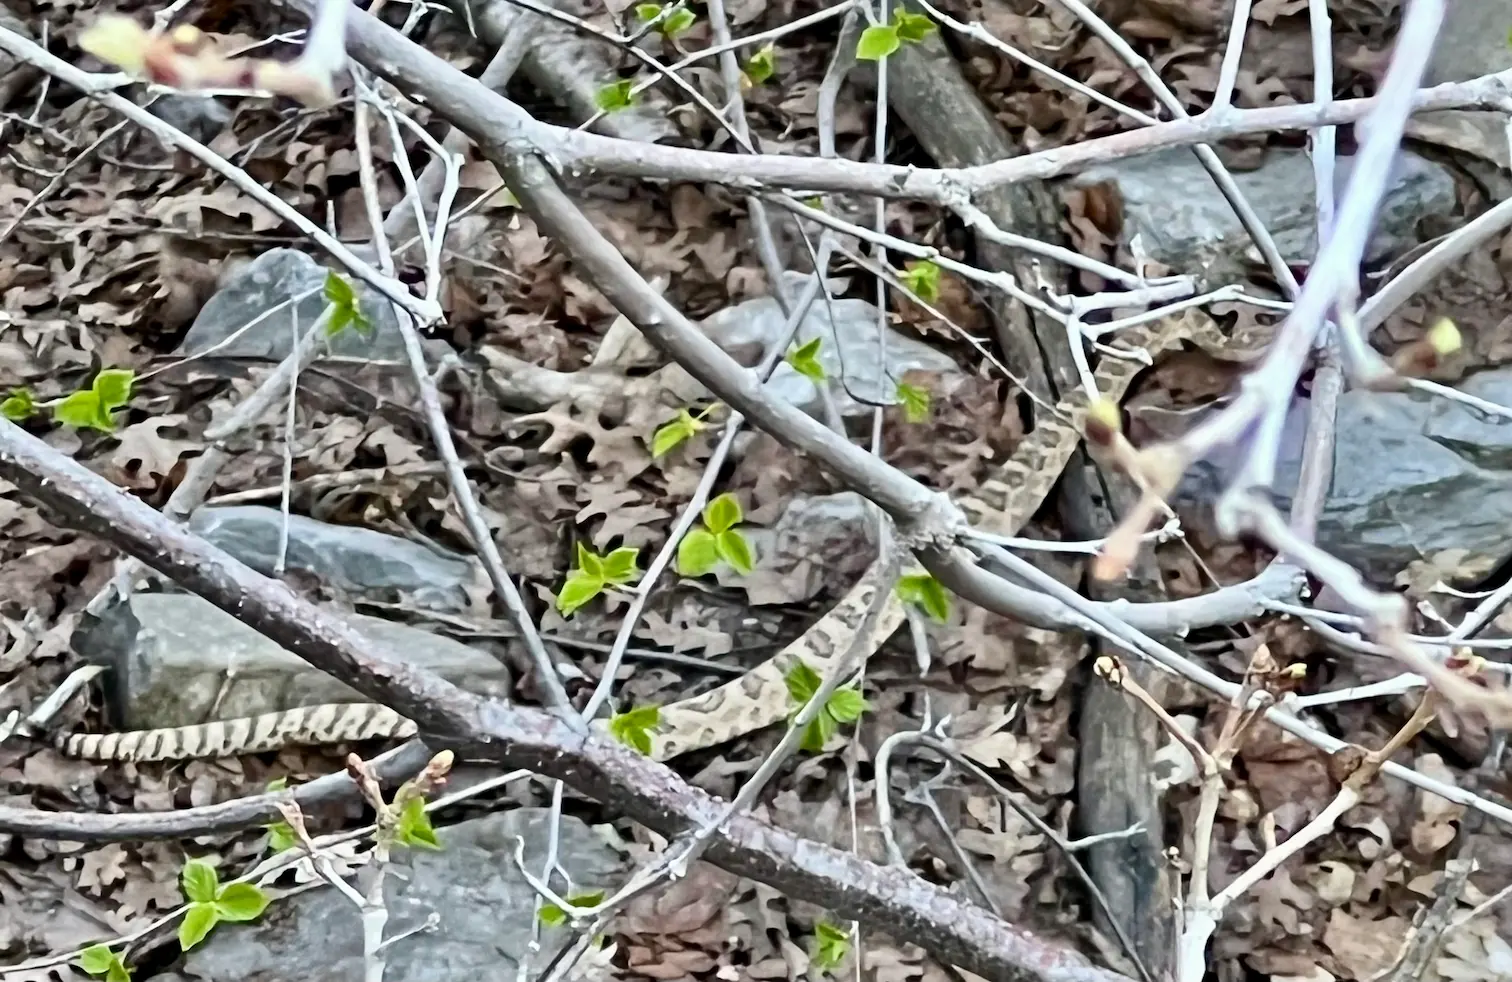 Lindsey spotted a 2-3 ft long Rattlesnake near the hiking trail